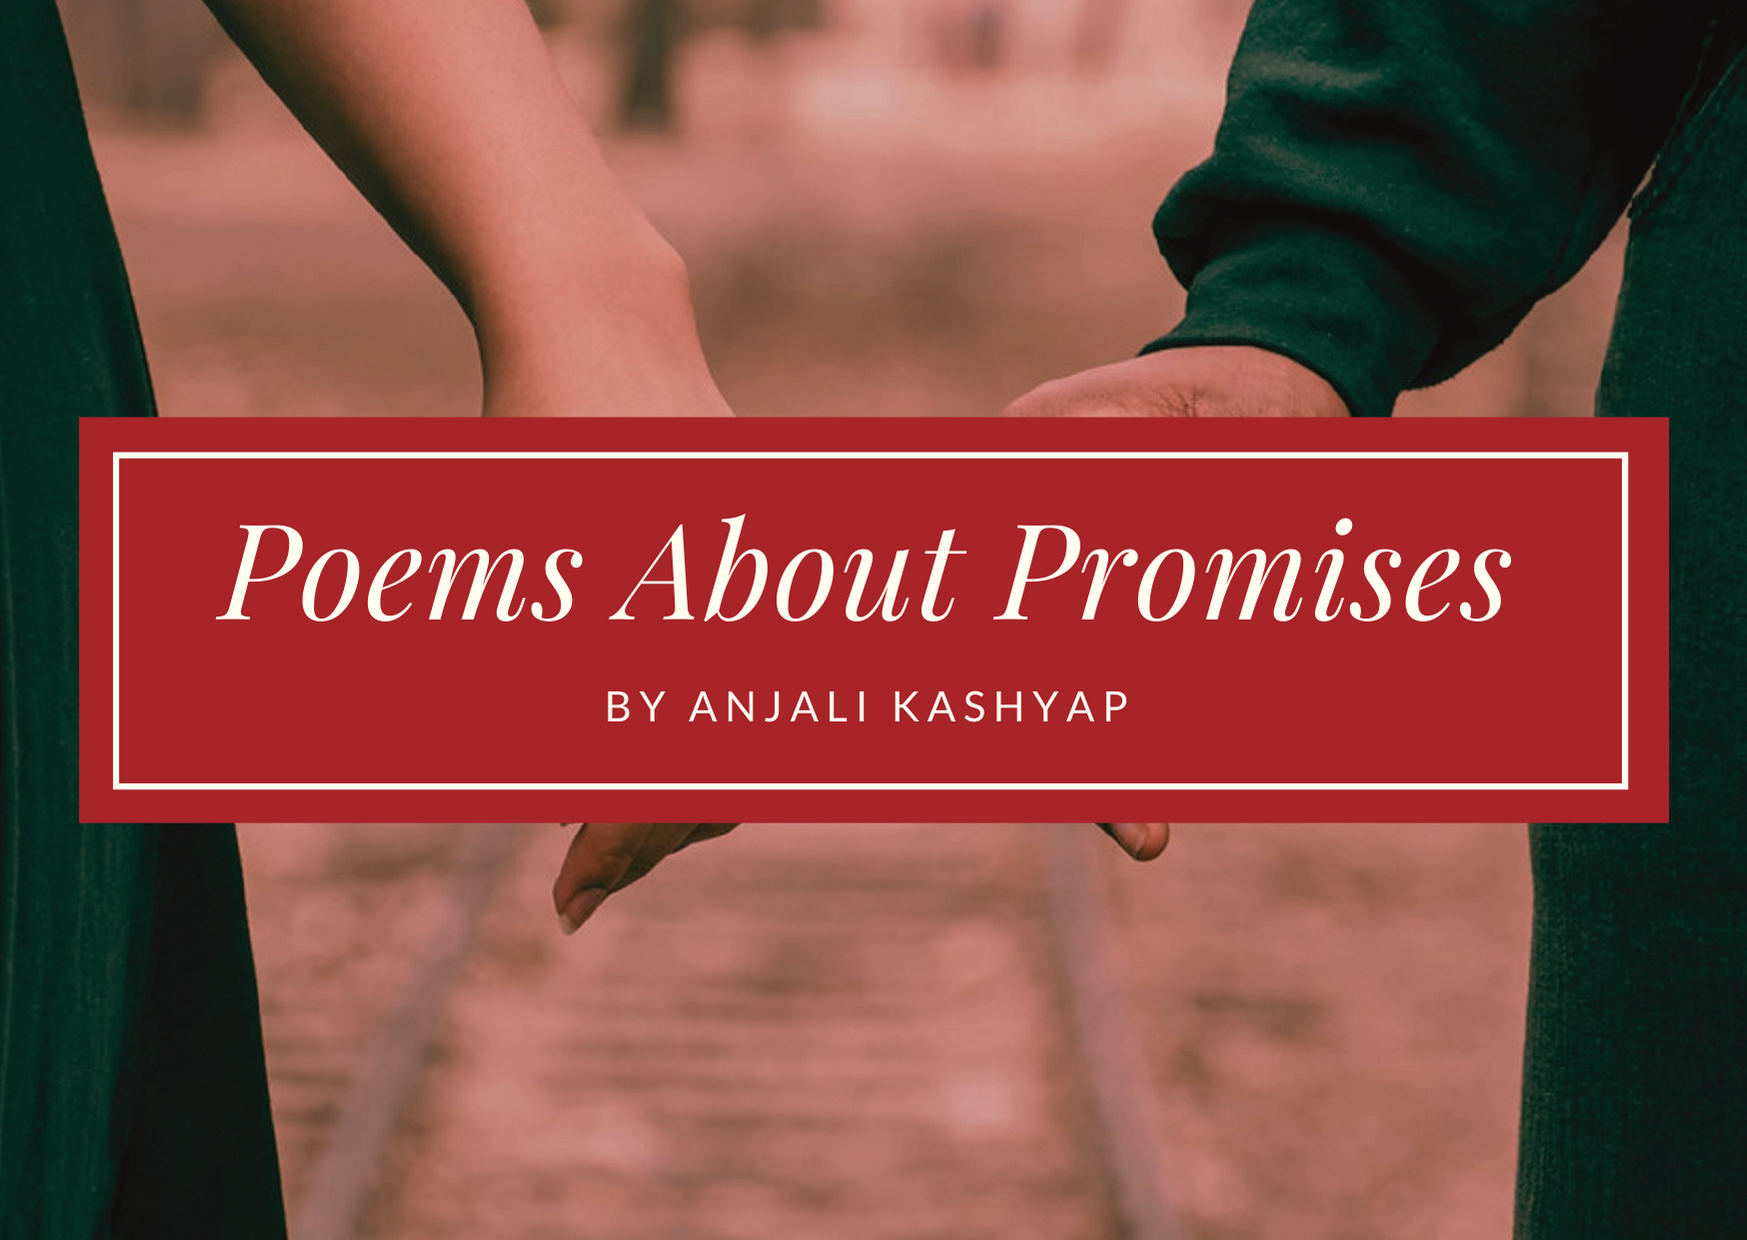 Poems About Promises